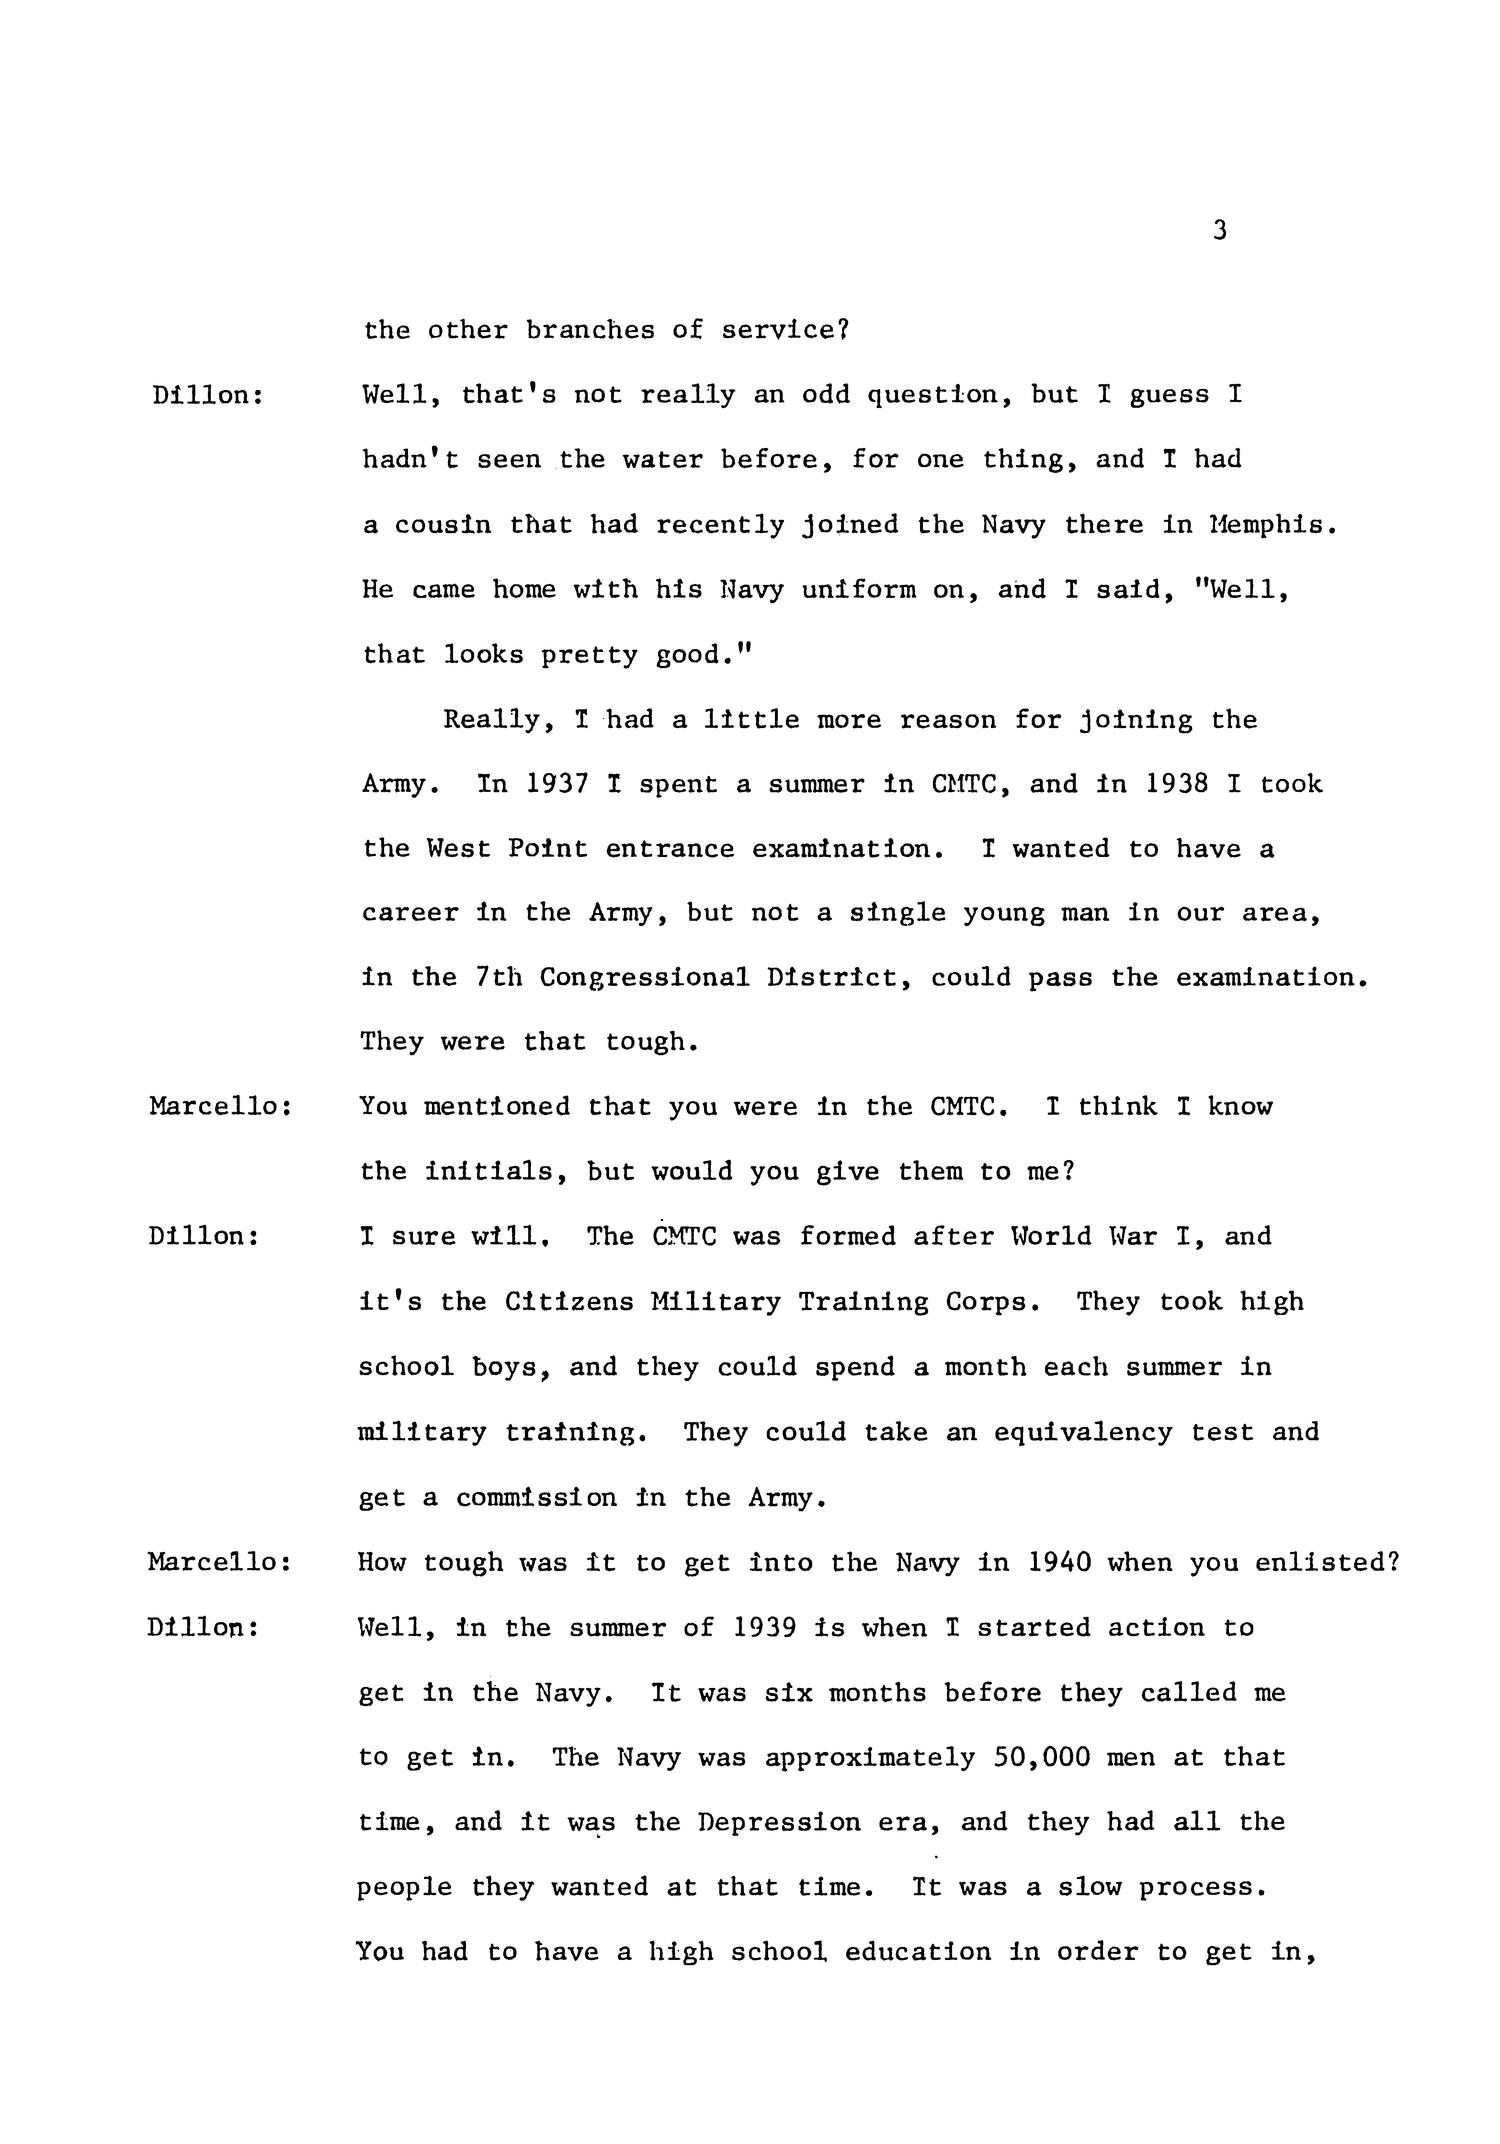 Oral History Interview with Joe C. Dillon, June 6, 1980
                                                
                                                    3
                                                